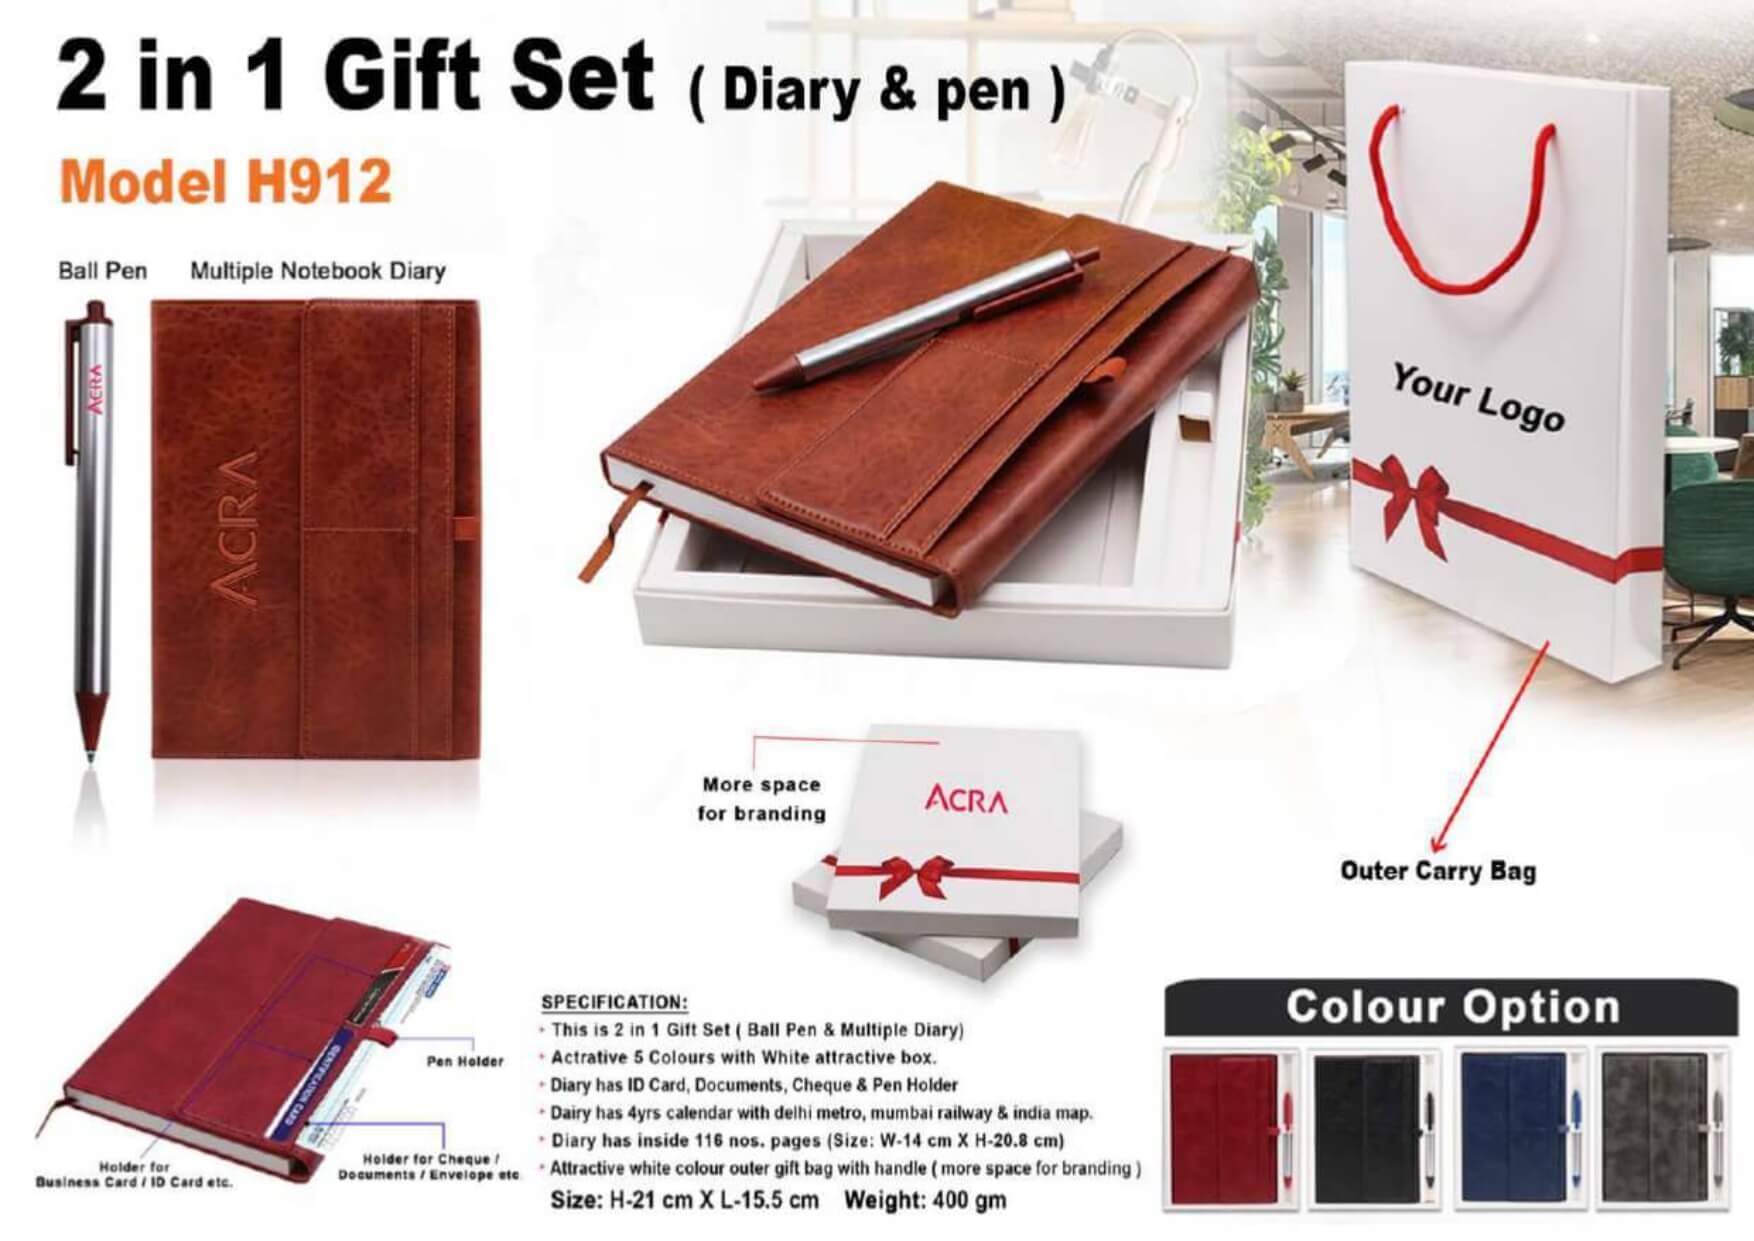 2 in 1 Gift Set Diary and Pen 912